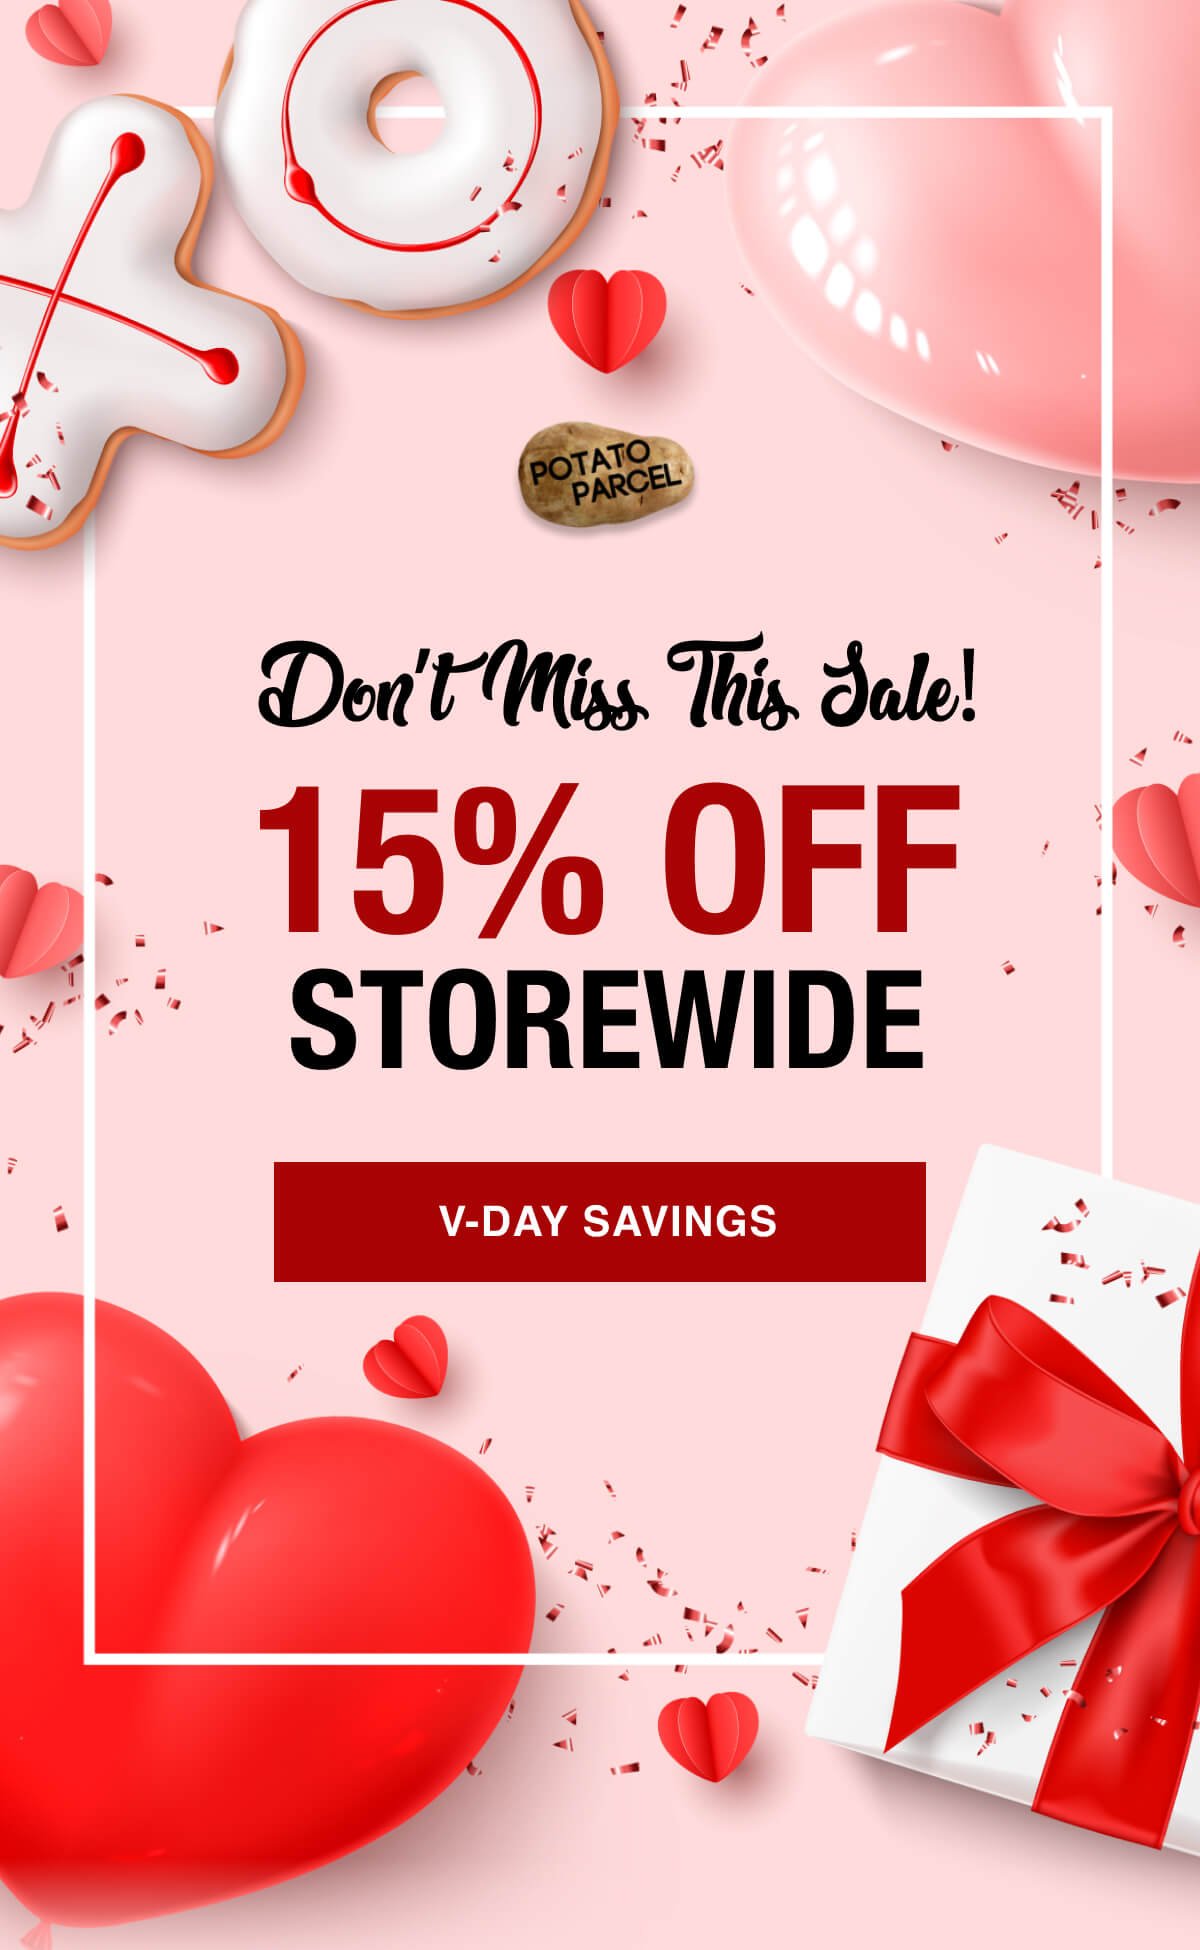 Don’t Miss This Sale! 15% OFF STOREWIDE